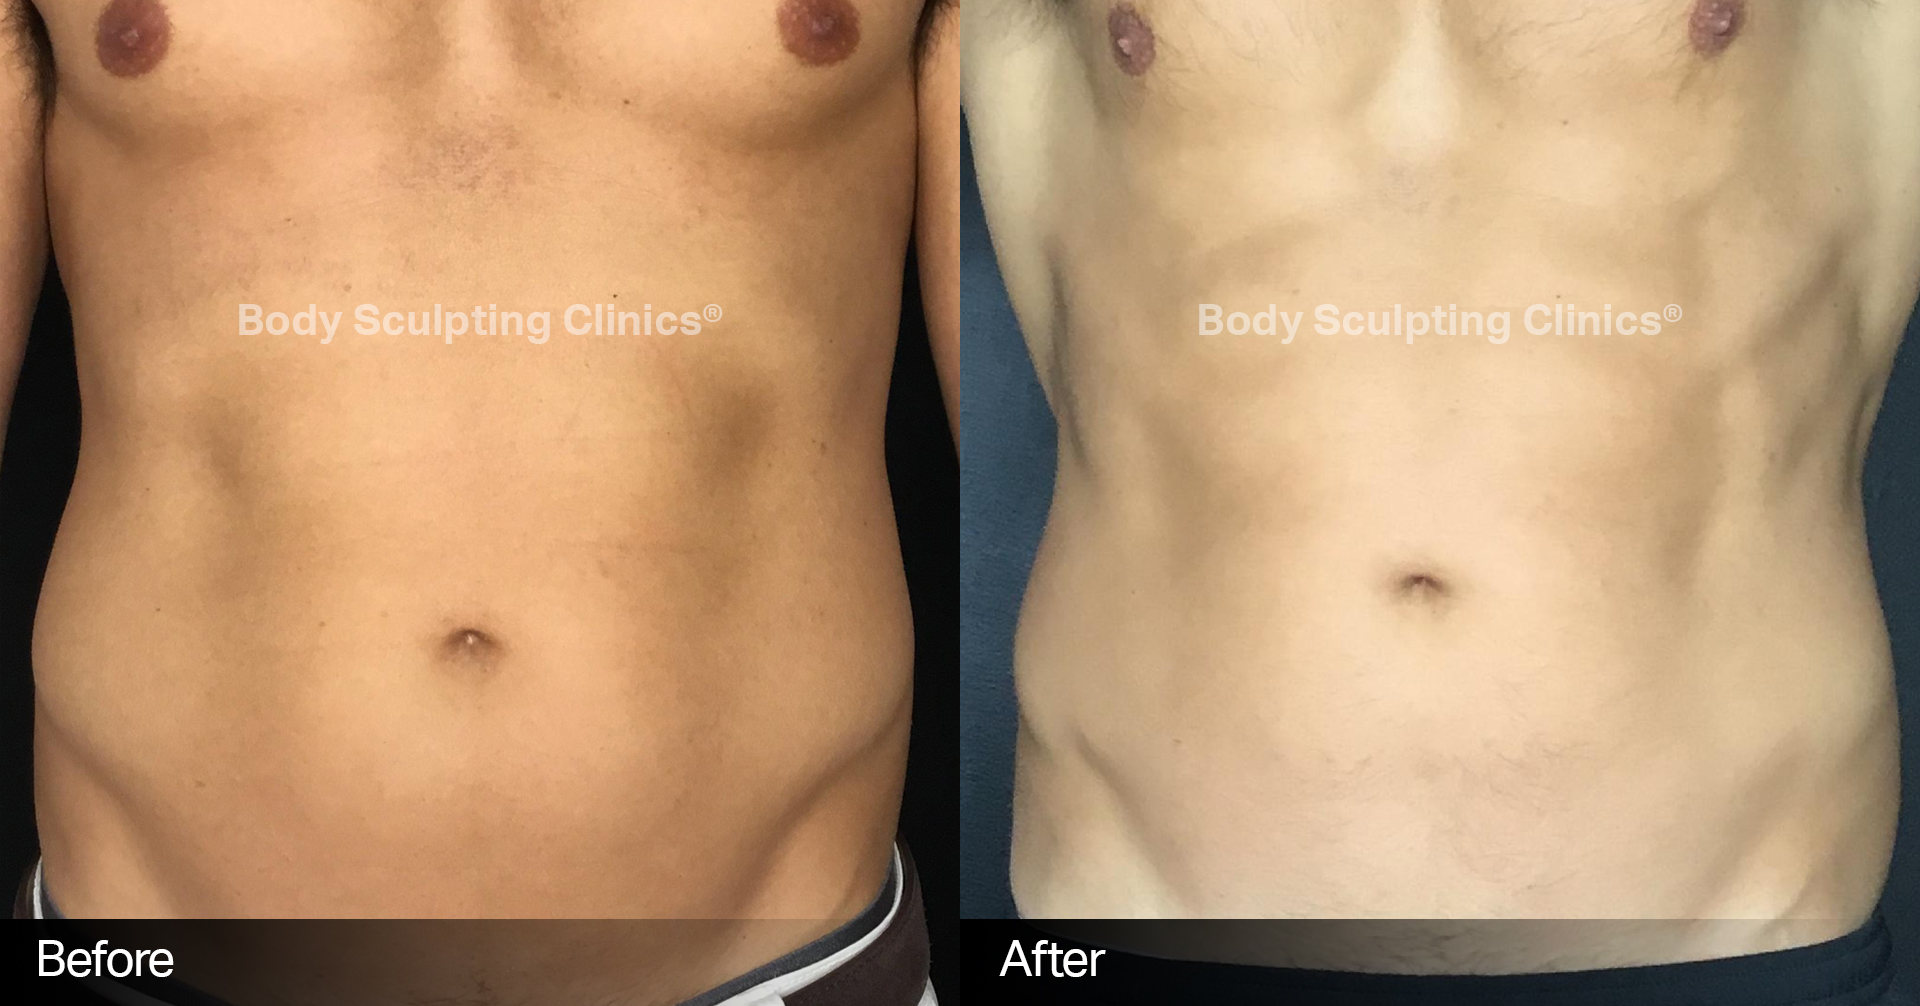 Sculpt Body Clinics is all about RESULTS! When body sculpting